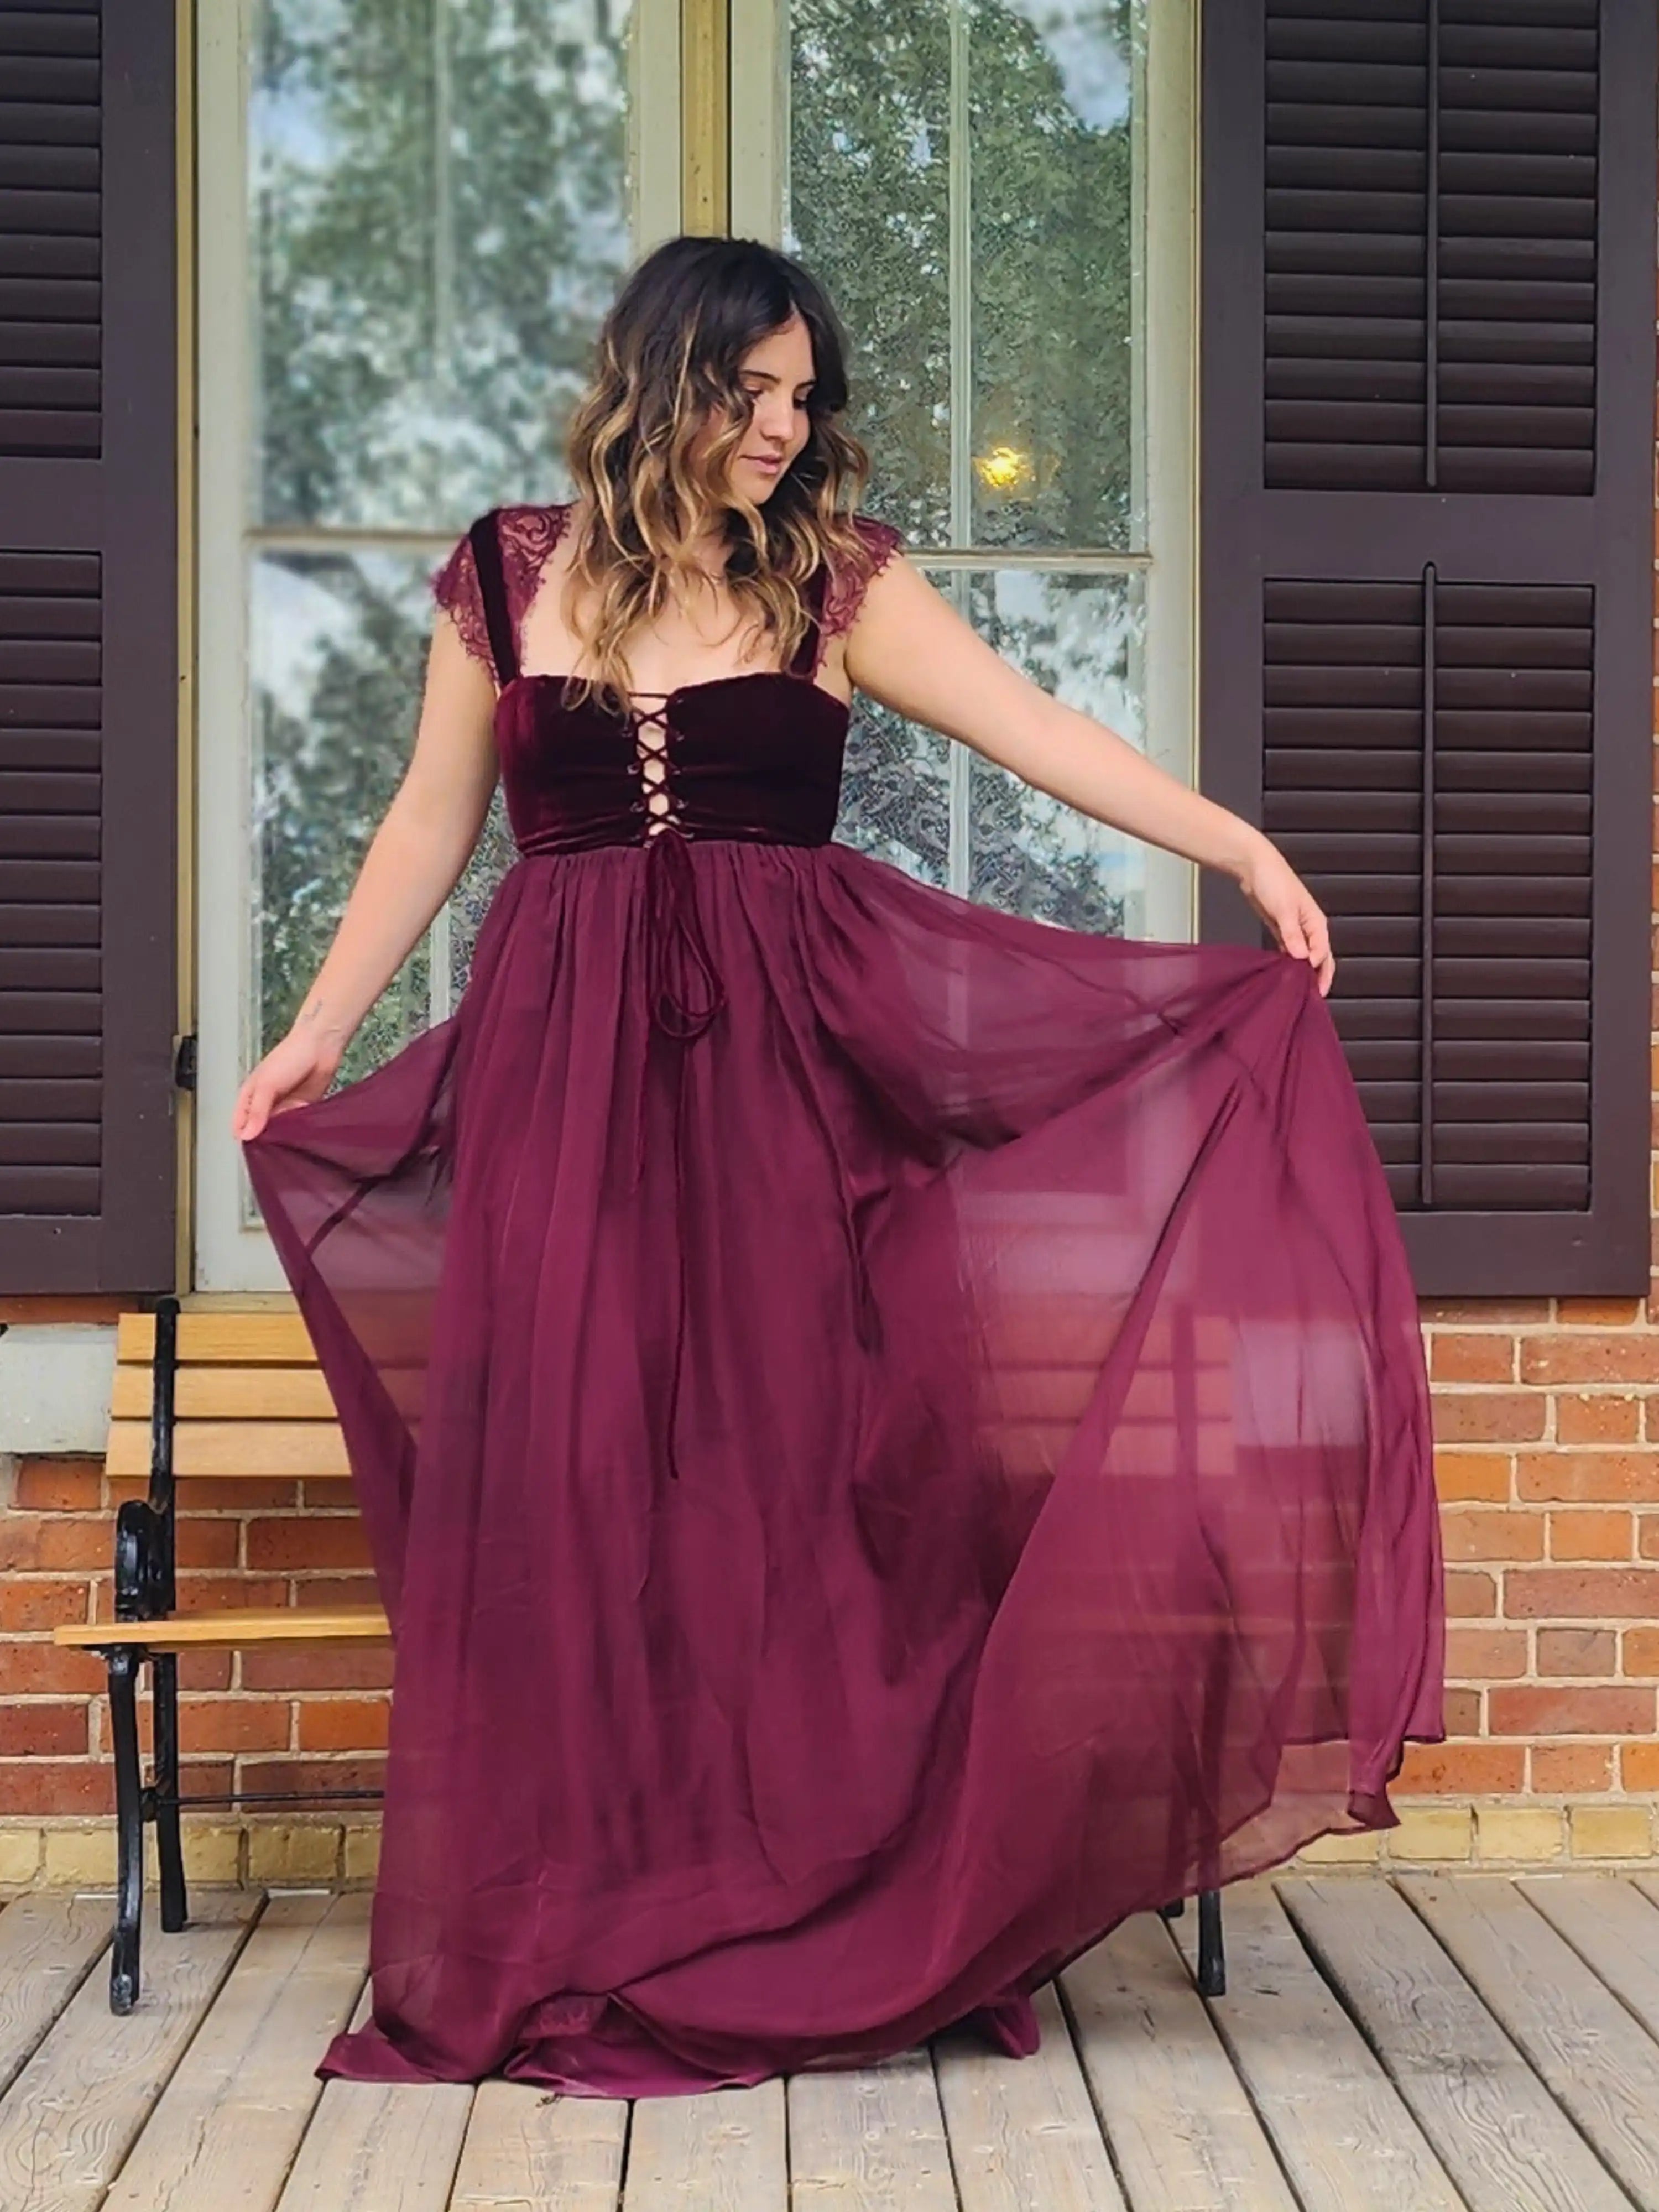 The Rose Petal Lovers Gown - Introducing the Rose Petal Lovers Gown (formerly the Scorned Lovers Gown); this gown is more than just a garment; it's a poetic expression of the emotions that dwell within the human heart. Crafted with meticulous artistry, th